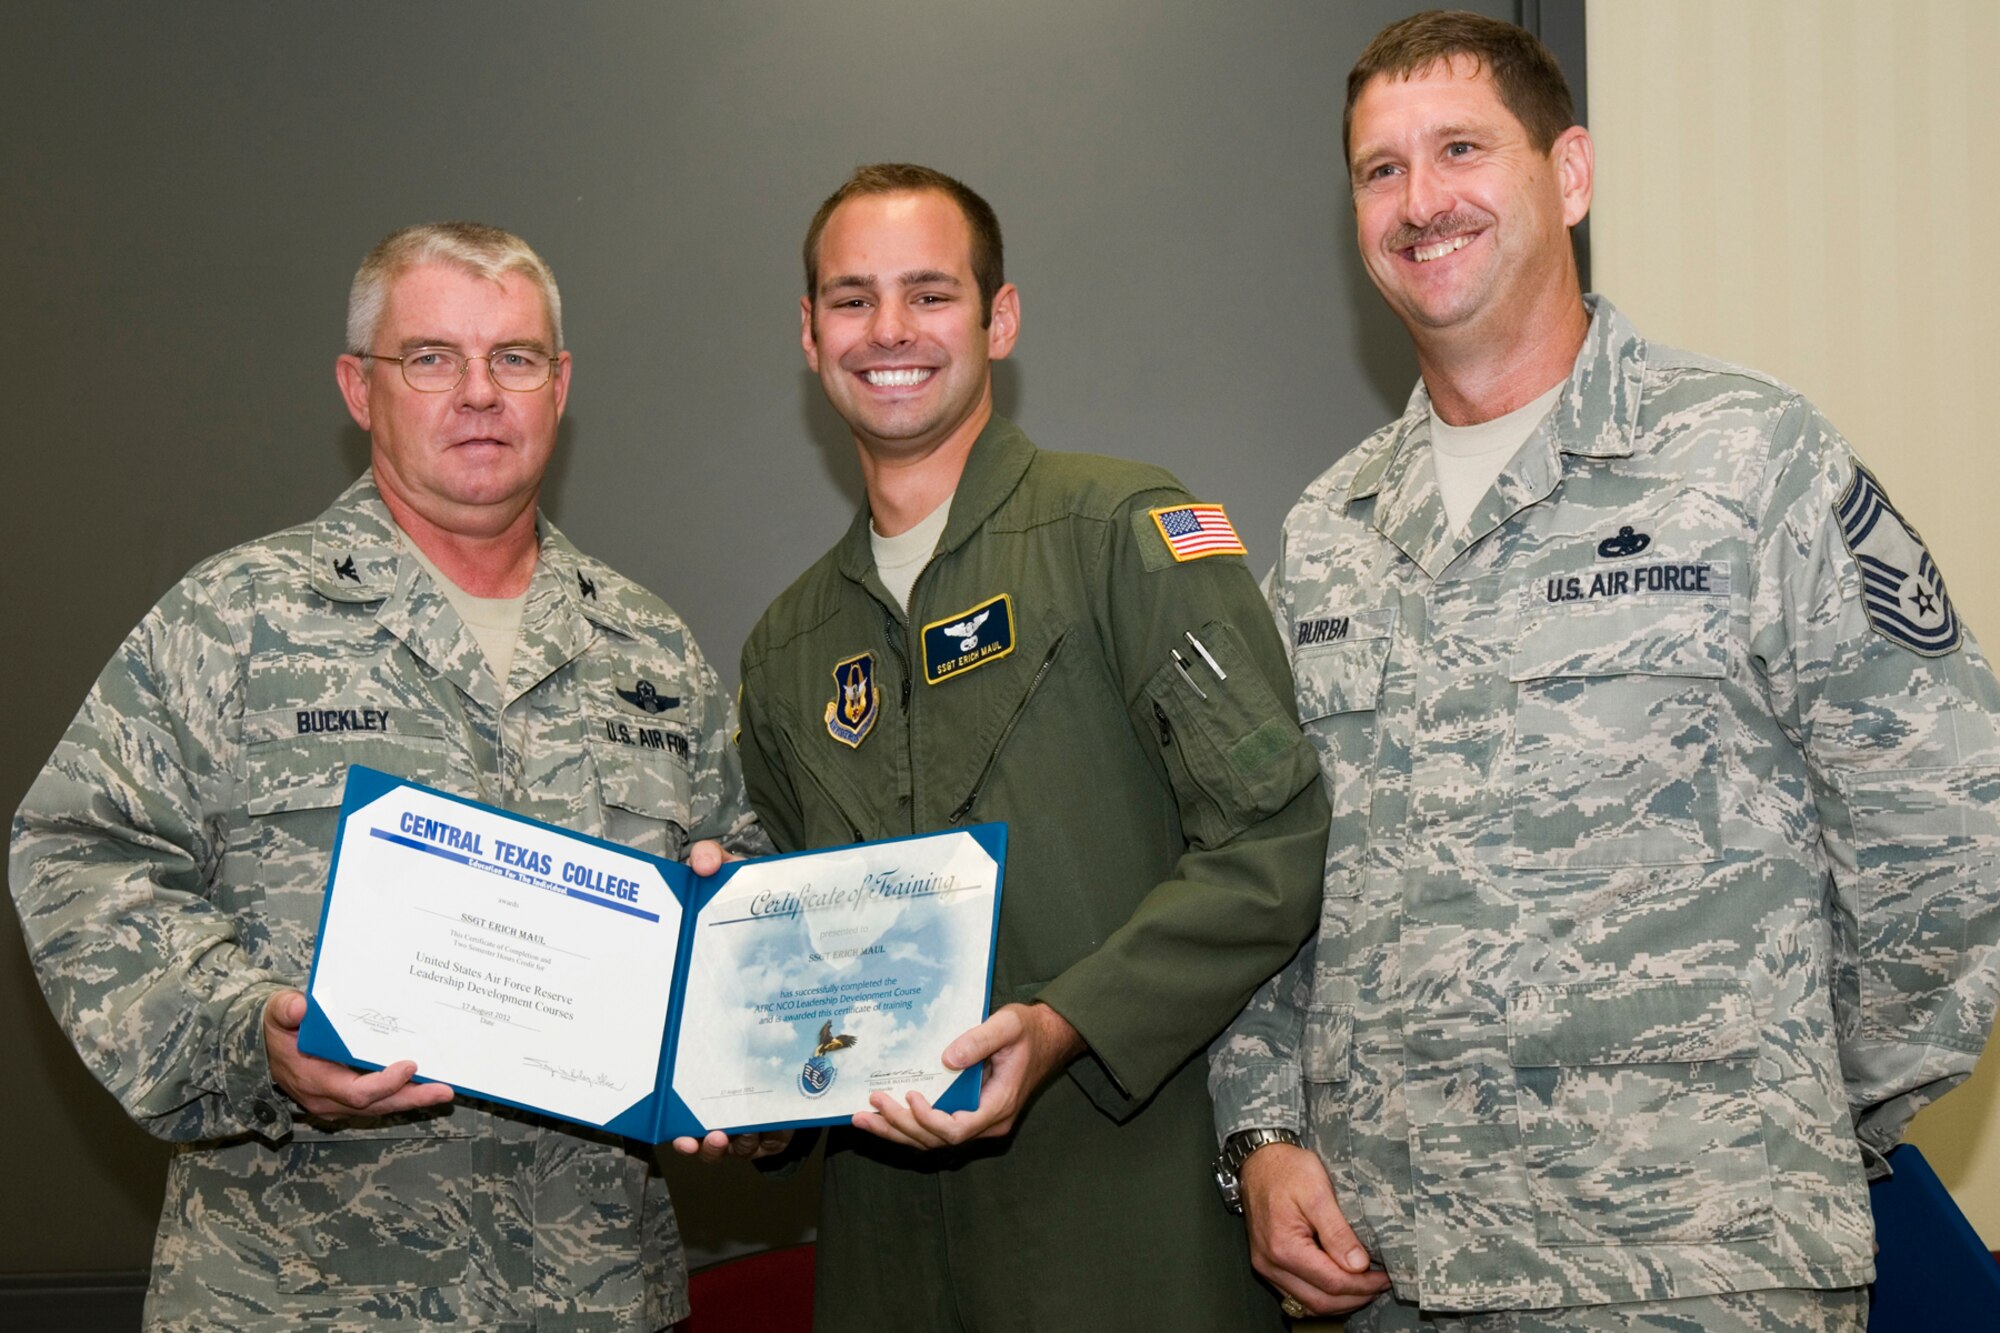 GRISSOM AIR RESERVE BASE, Ind. -- Staff Sgt. Erich Maul, 72nd Air Refueling Squadron in-flight refueling technician, receives a certificate of training from Col. Don Buckley, 434th Air Refueling Wing commander, and Chief Master Sergeant James Burba, 434th Maintenance Operations Flight maintenance superintendent, at a graduation ceremony for a Non-Commissioned Officer Leadership Development Course here Aug. 17. Maul graduated the course with 20 other NCOs. (U.S. Air Force photo/Senior Airman Andrew McLaughlin)